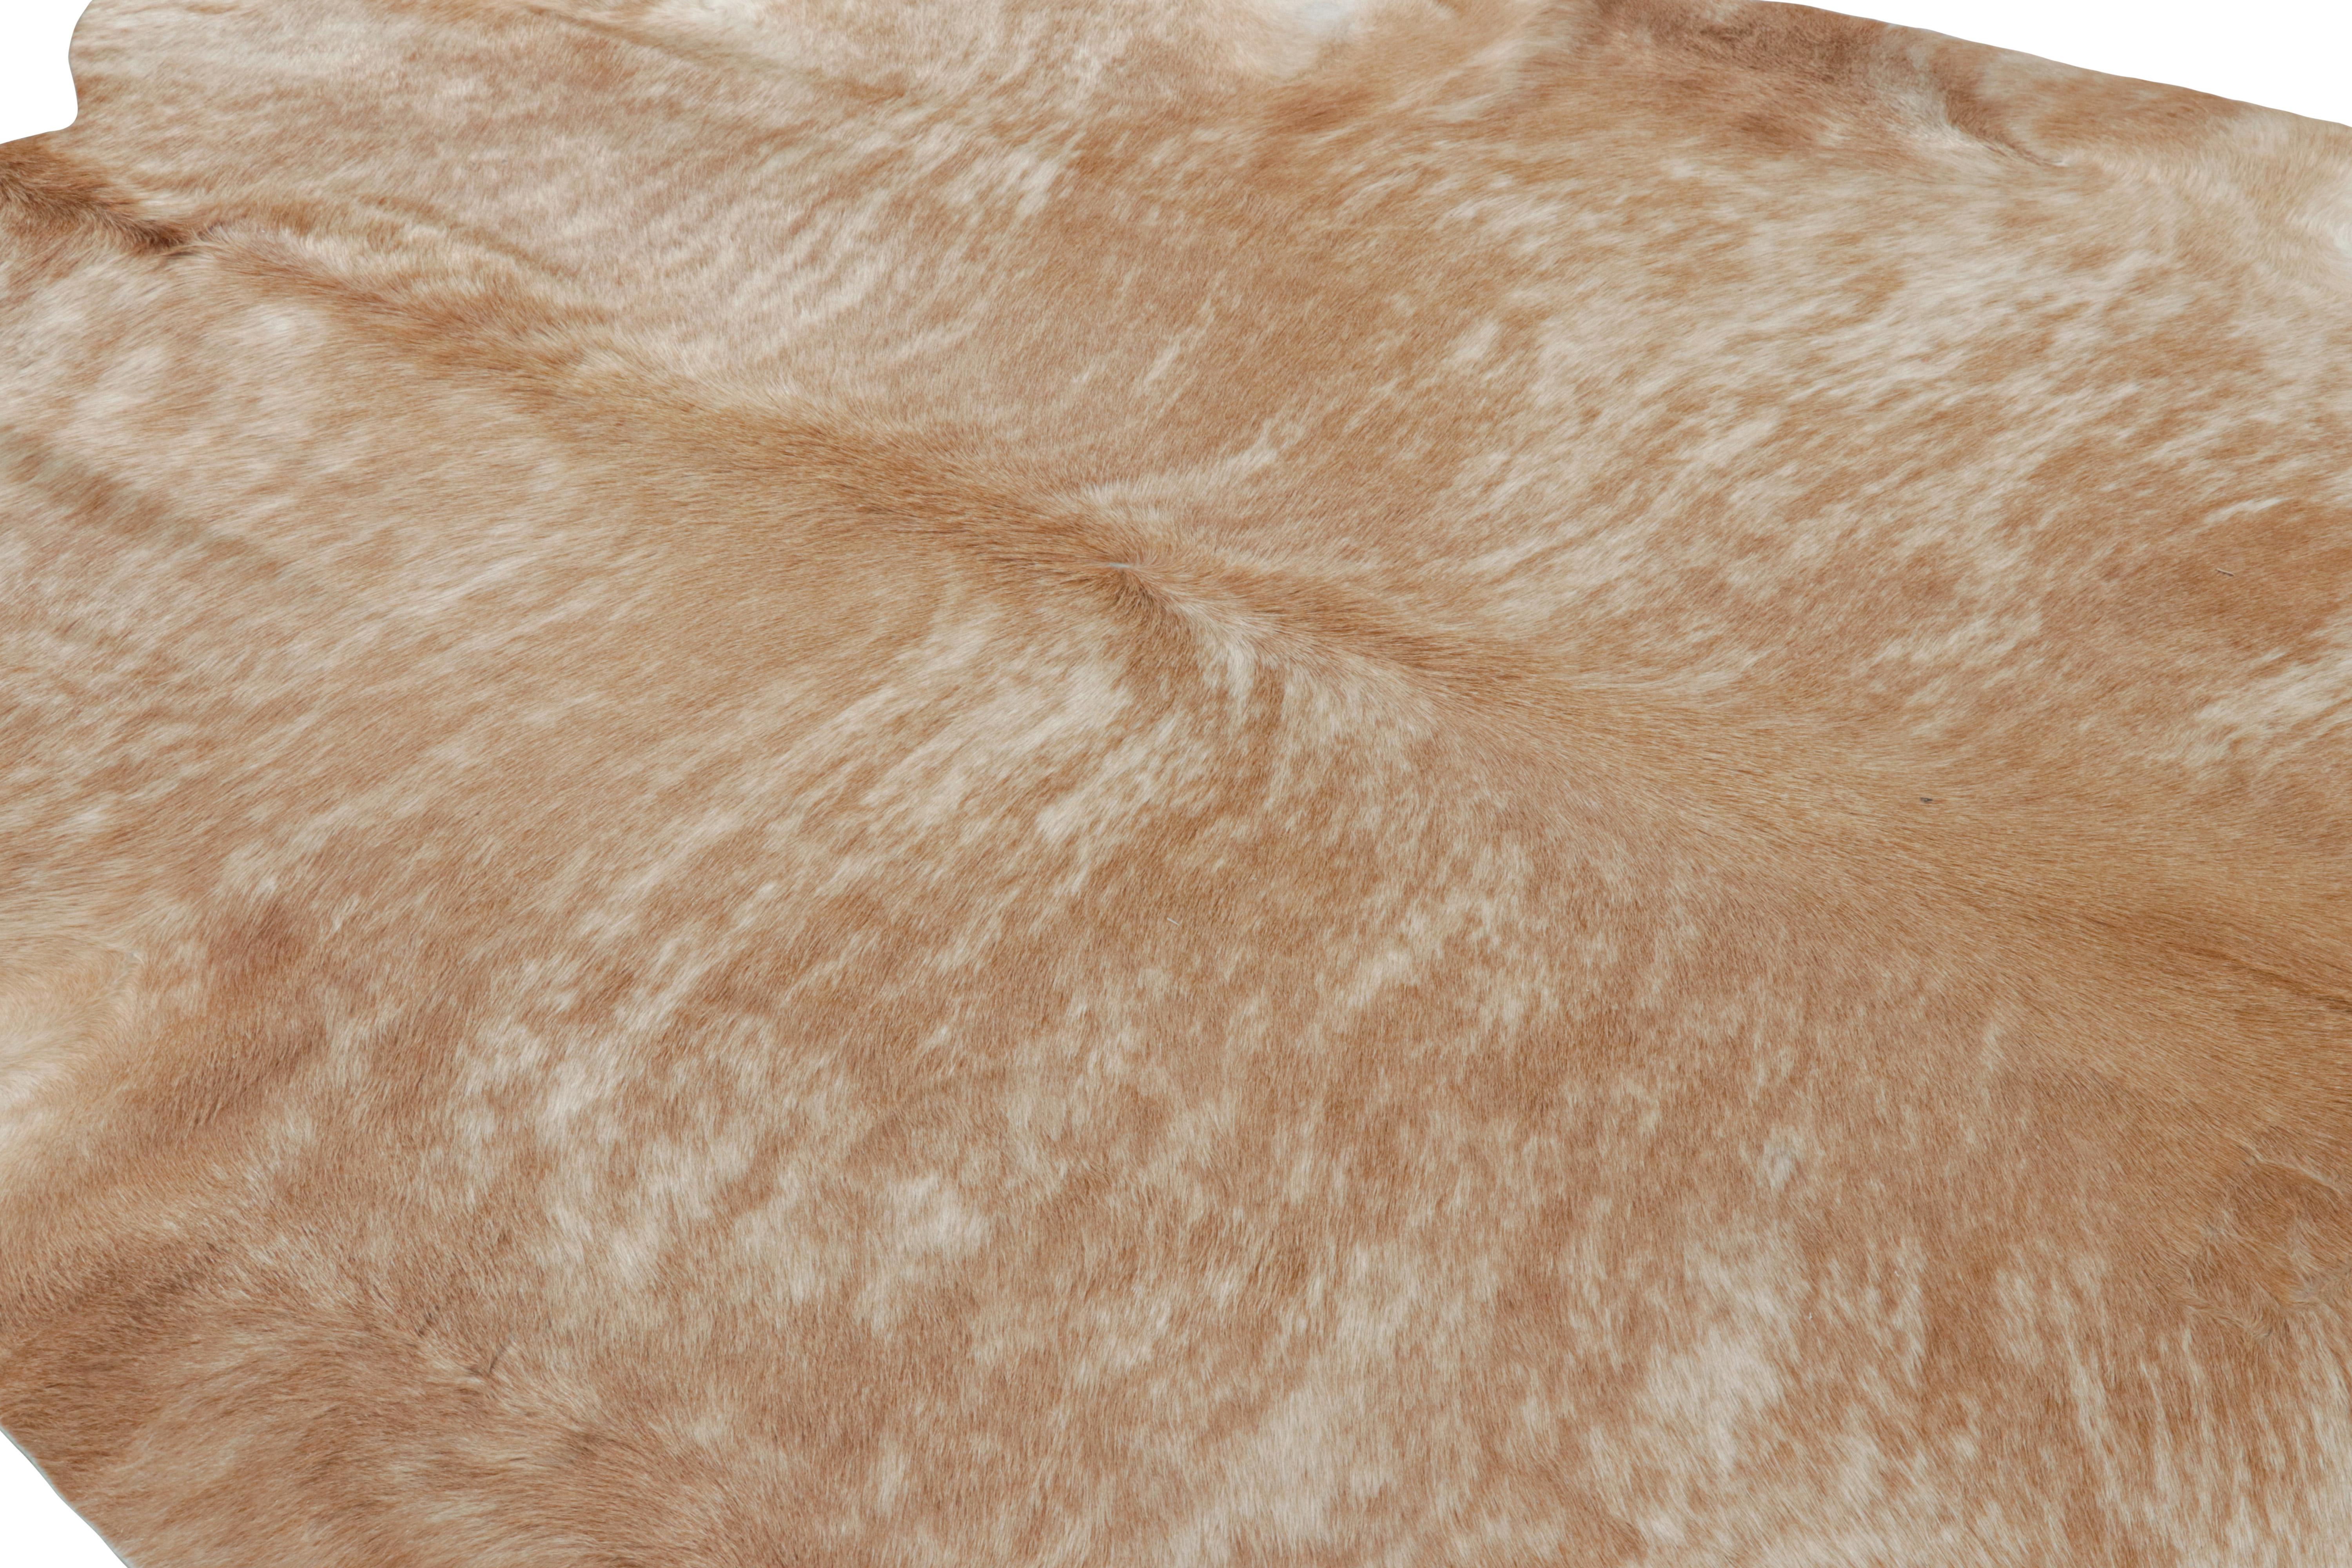 This 8x8 contemporary cowhide rug, originating from Brazil, is a comfortable and stylish addition to a wide range of spaces for its unique shape inherent to the craft. 

On the Design: 

Admirers of the craft may appreciate this new cowhide rug made